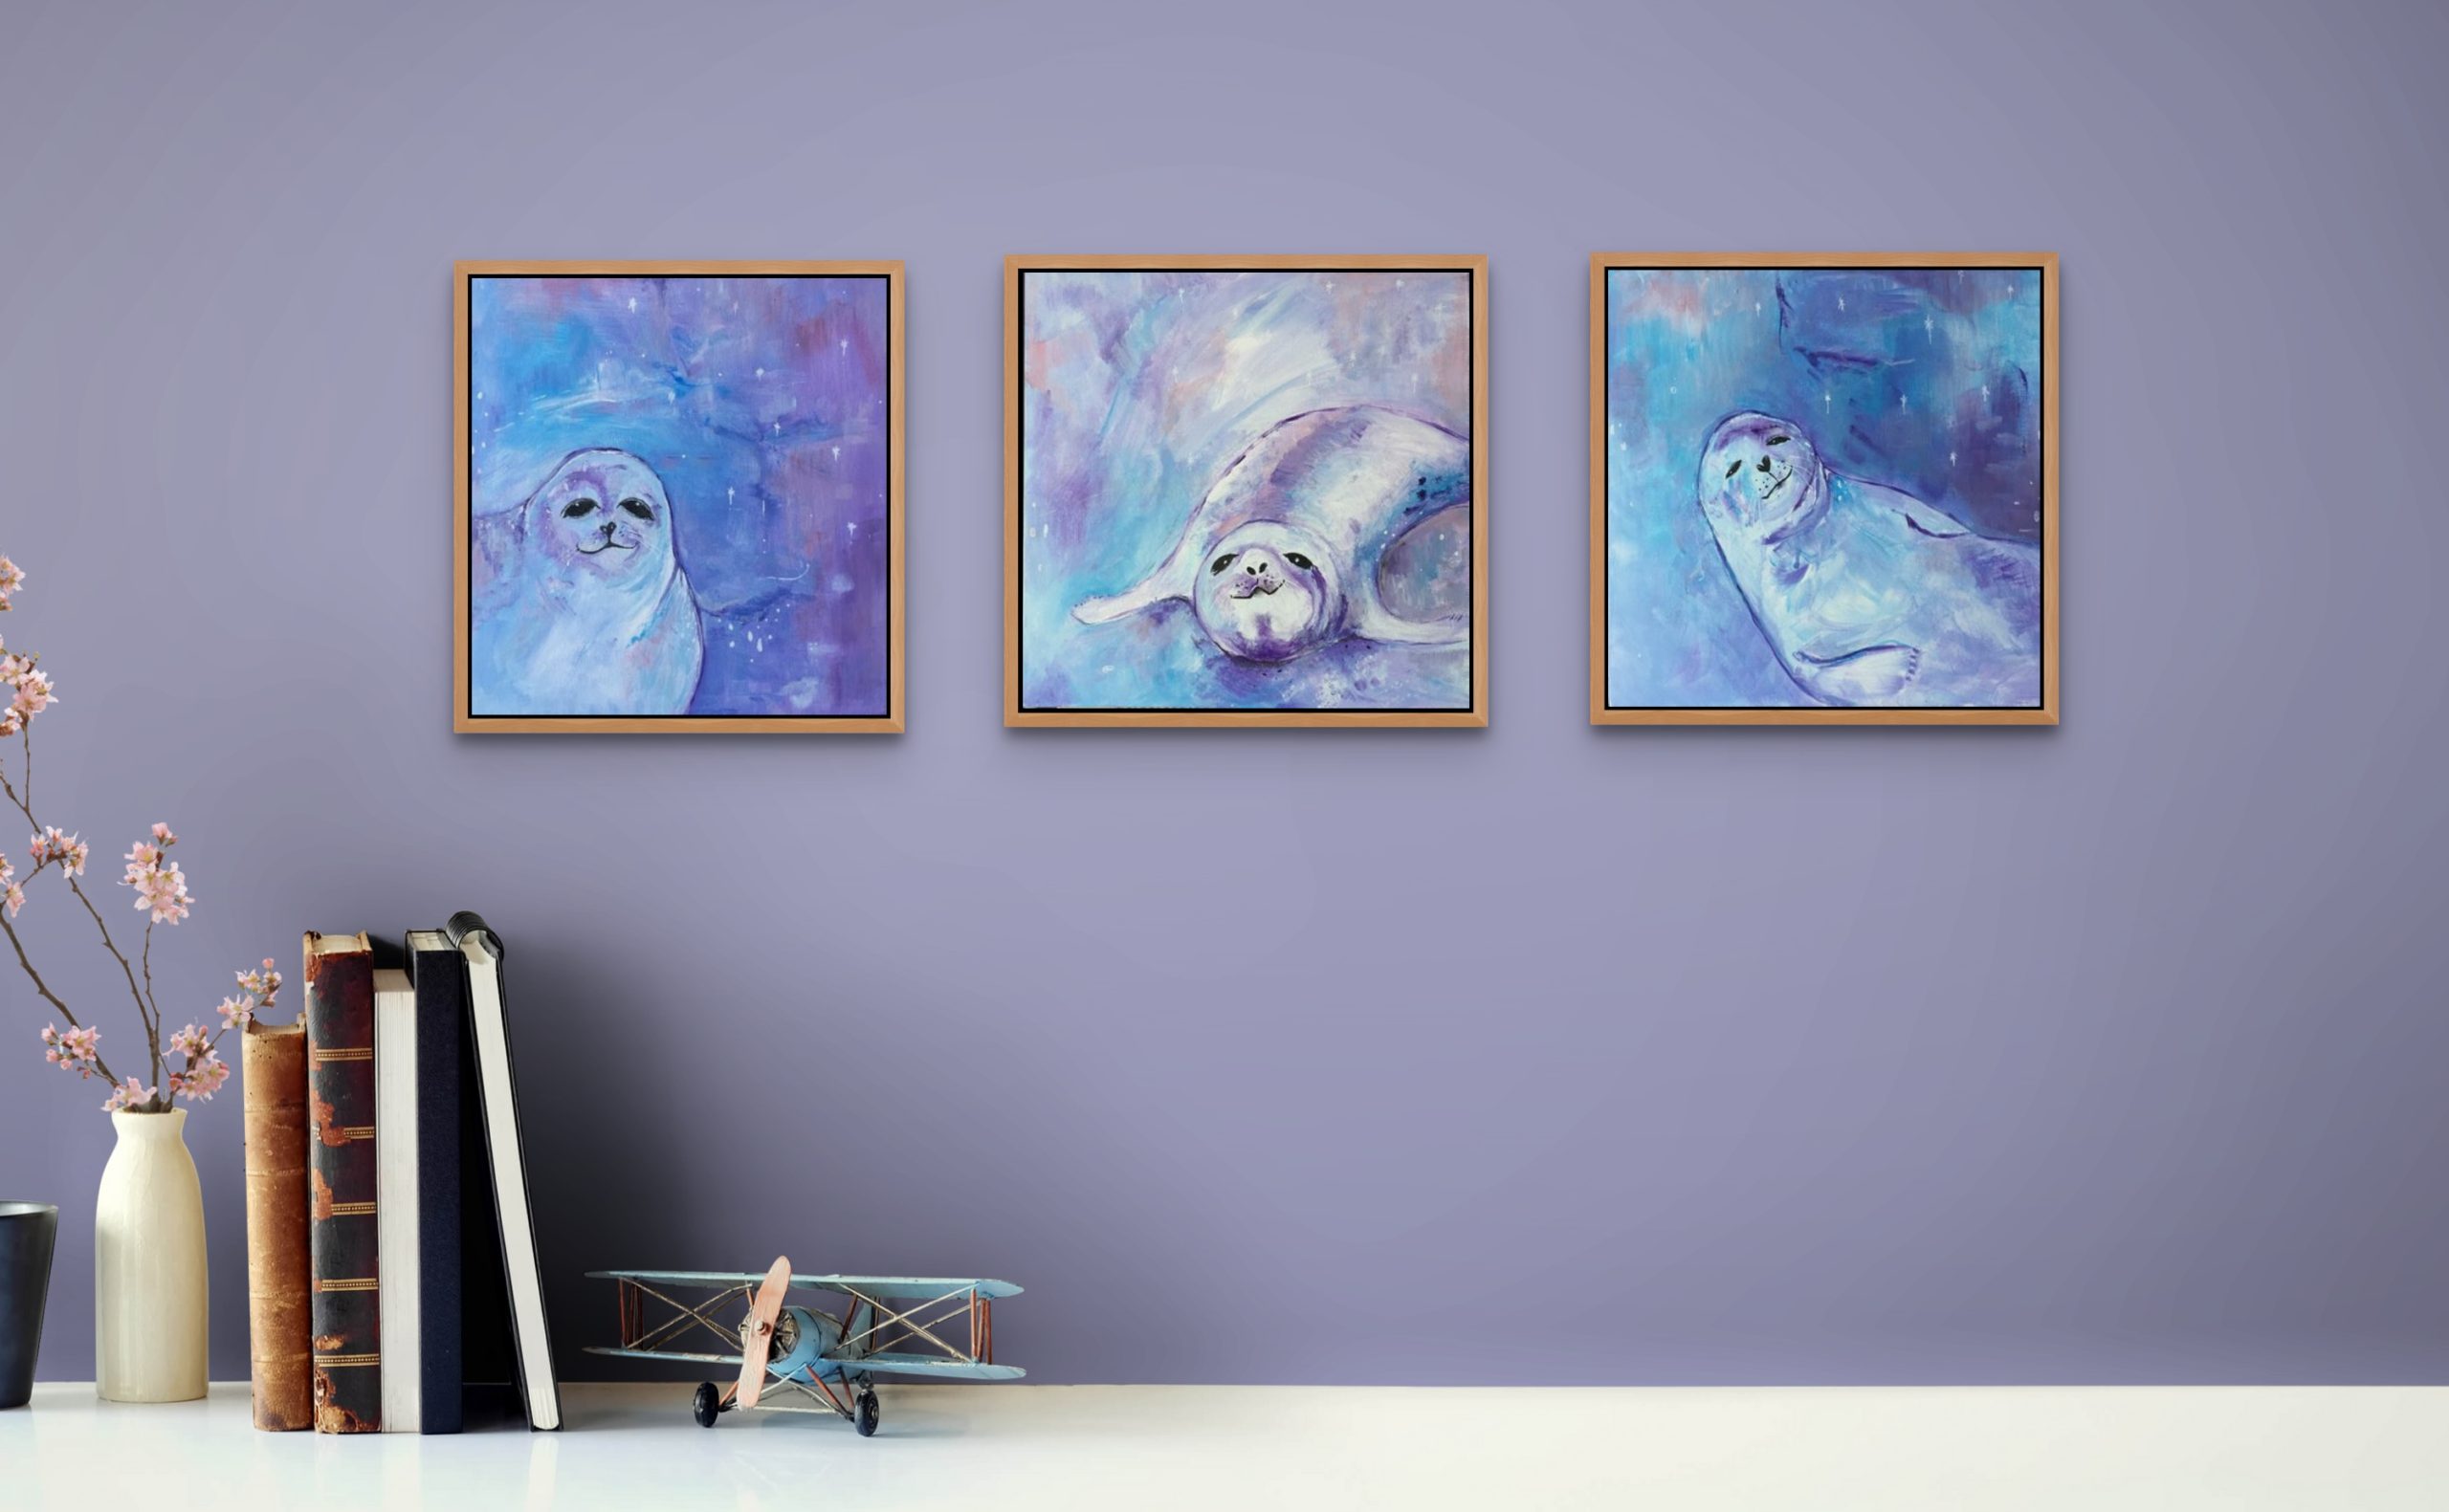 A set of 3 seal paintings to delight you and bring joy and magic to your walls. All 3 show cheeky seals painted in tones of white, pale blue and lilacs against star studded skies of the same tones of colour.